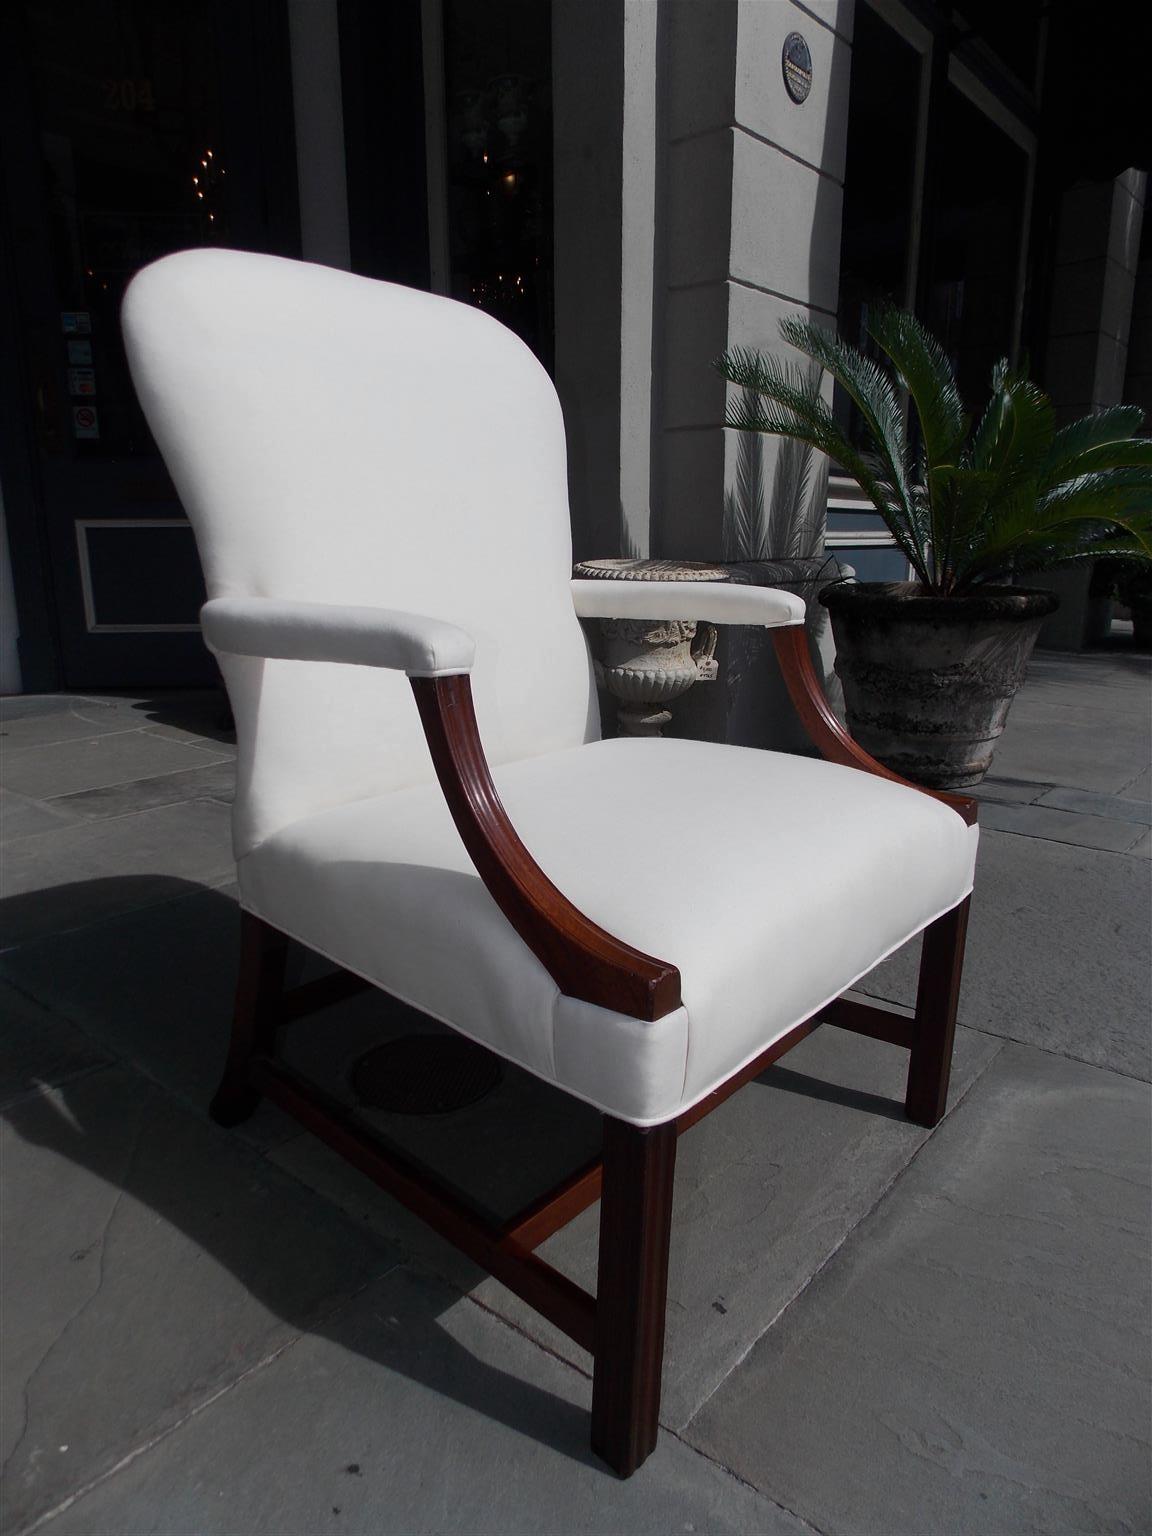 English Chippendale mahogany spoon back library chair with flanking scrolled fluted arms and resting on fluted squared legs, splayed rear legs with the original connecting stretchers. Chair is upholstered in white muslin with horse hair and cotton